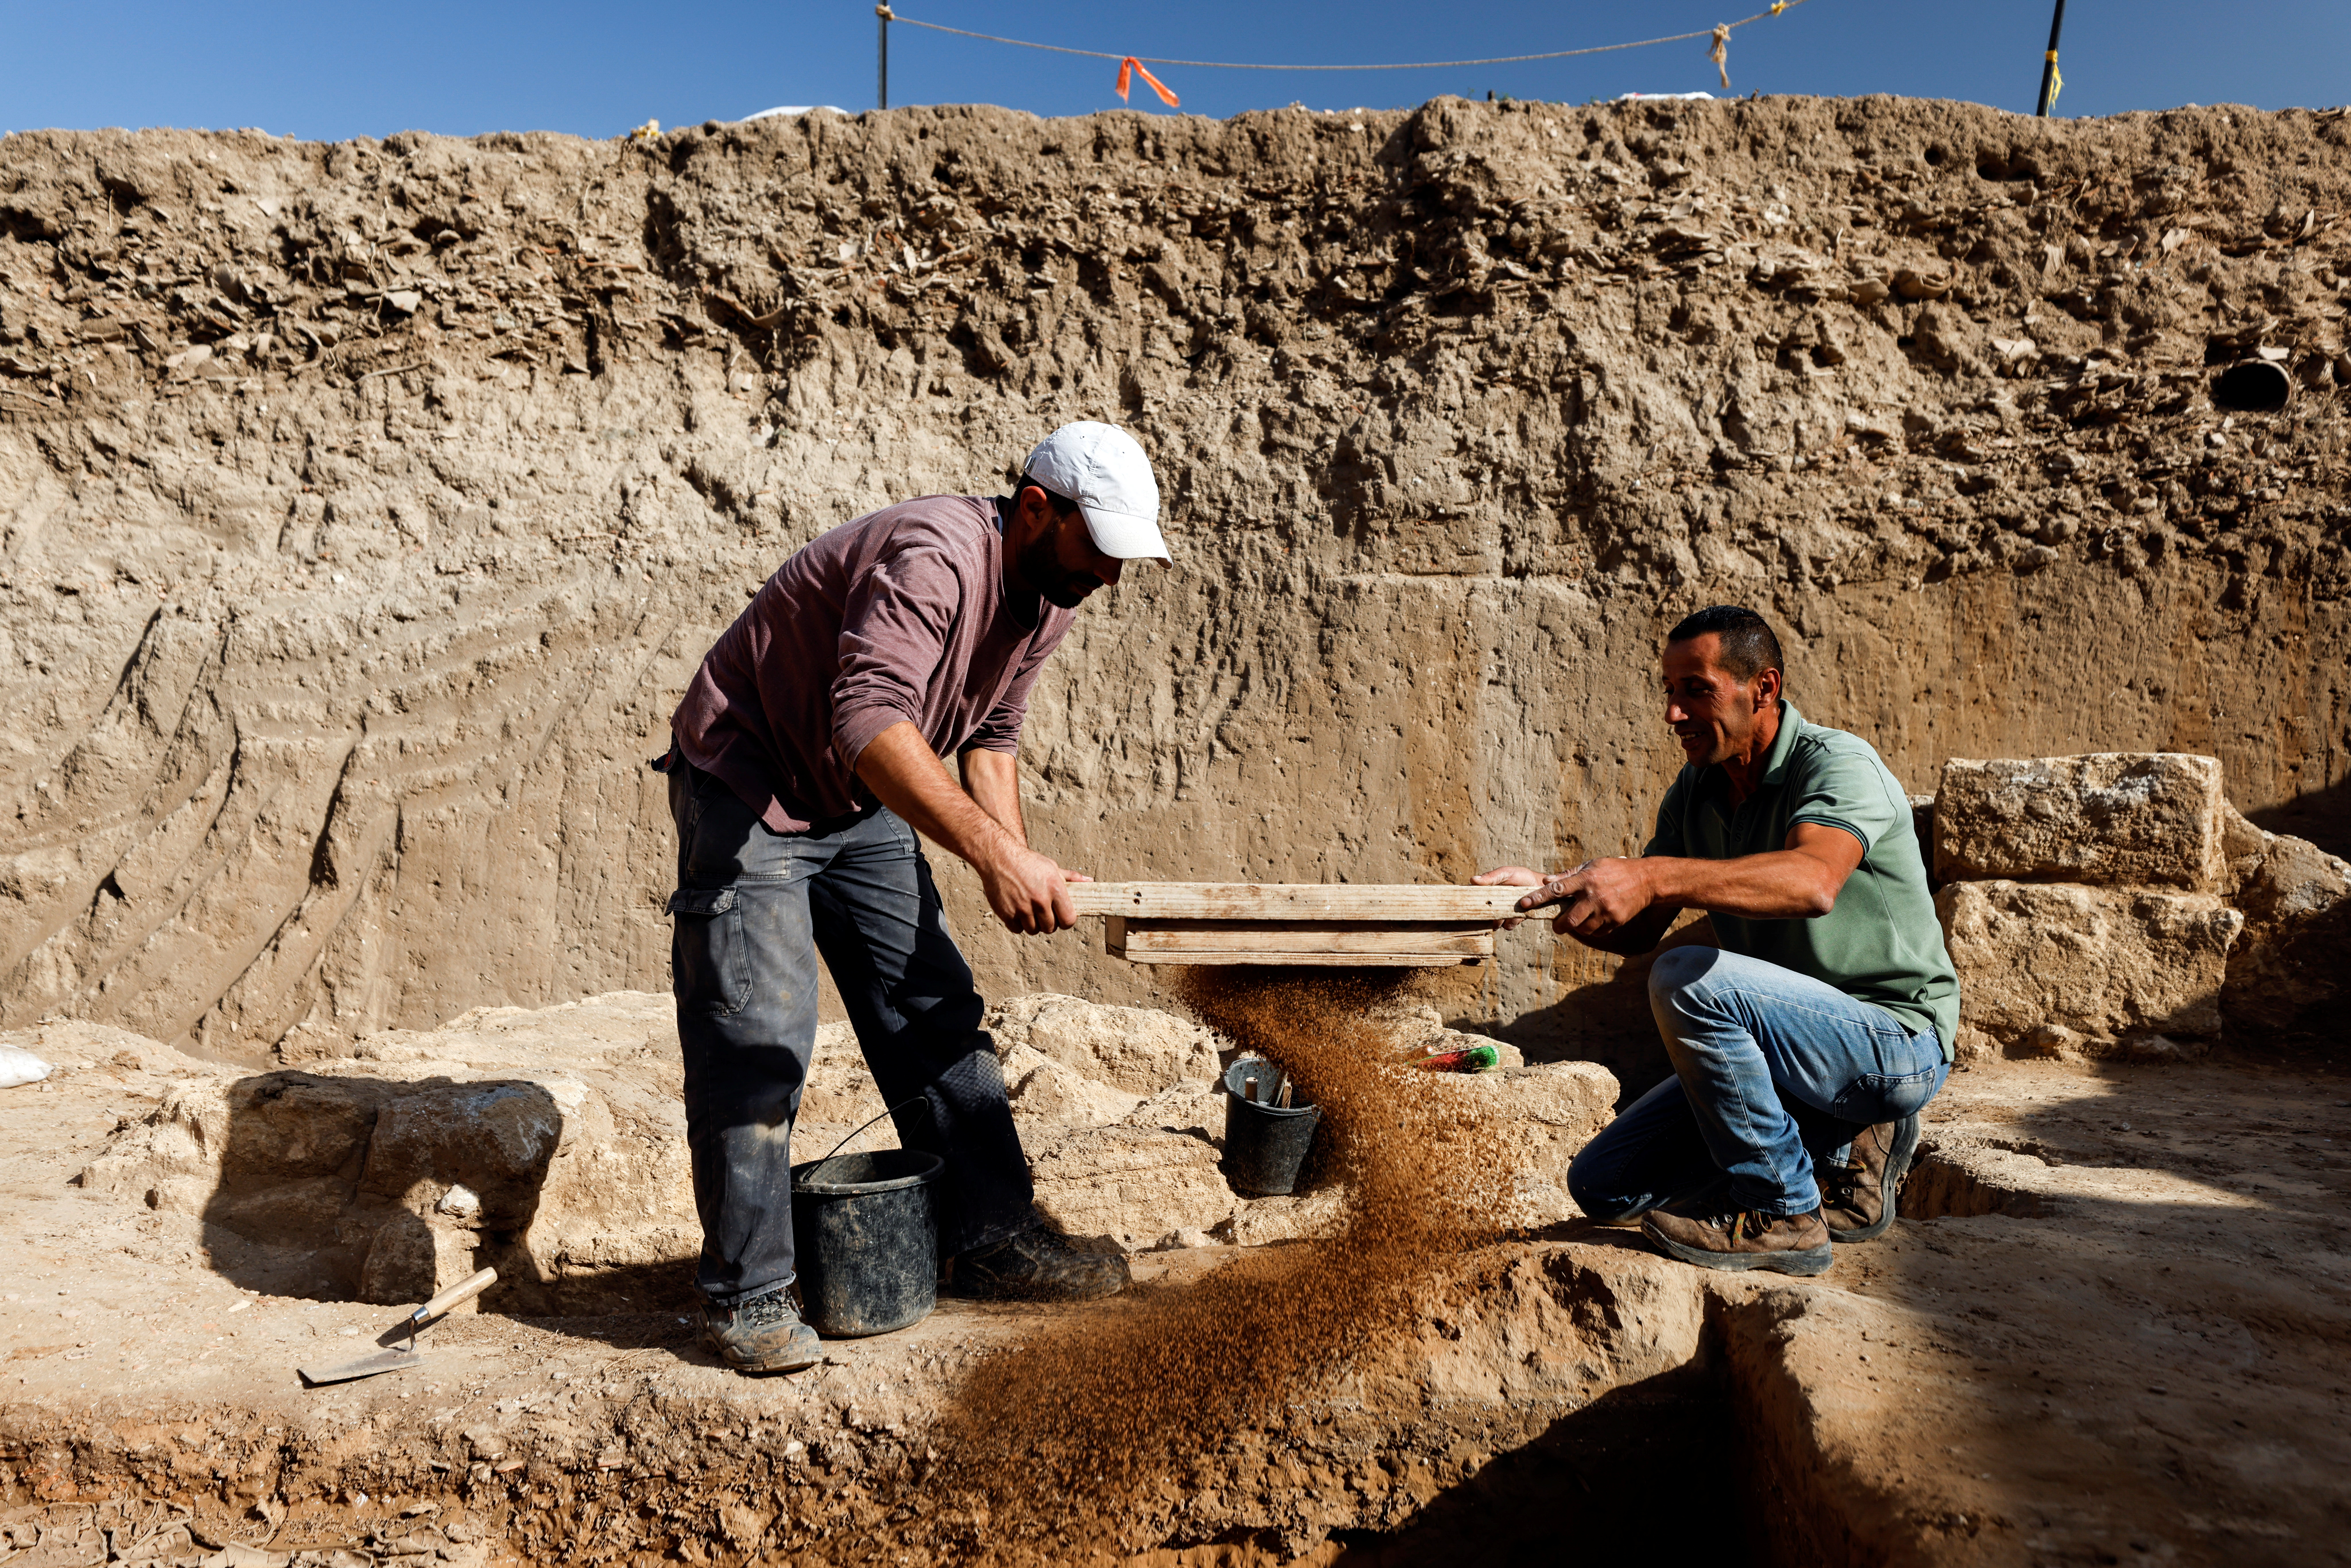 Workers use a sieve at the site of an excavation believed to be from the time of the Sanhedrin, the late first and second centuries CE according to the Israel Antiquities Authority, in Yavne, Israel November 29, 2021. REUTERS/Amir Cohen